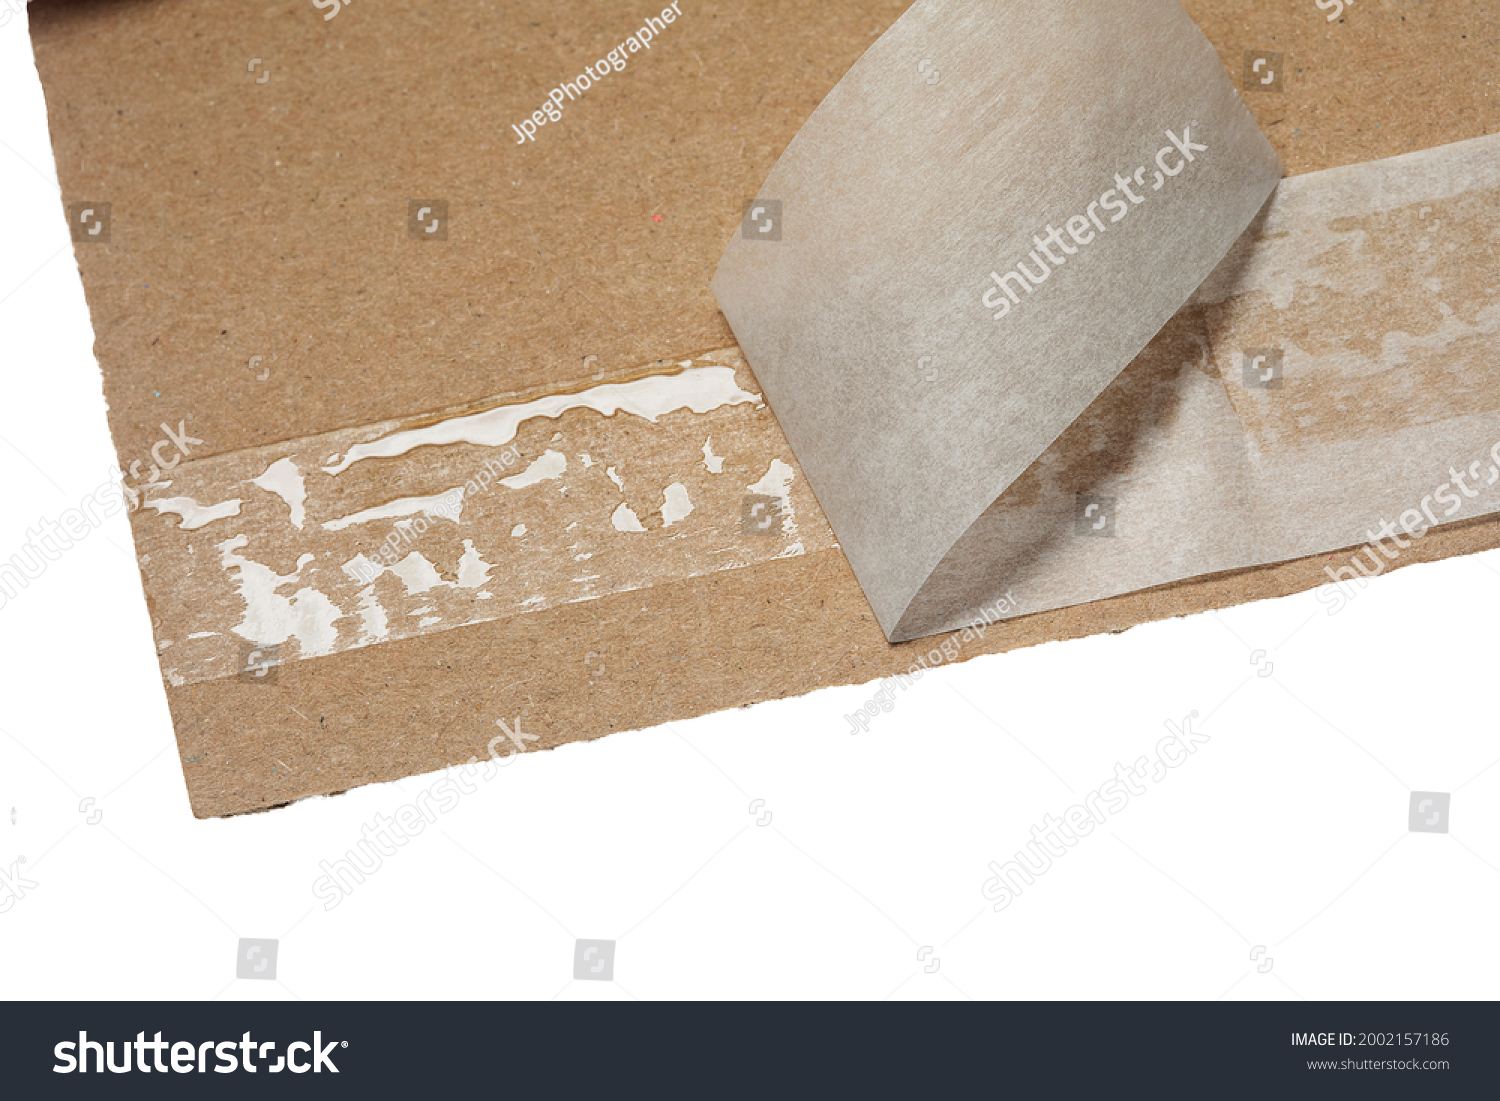 Sticky area for resealing a cardboard package, close up #2002157186